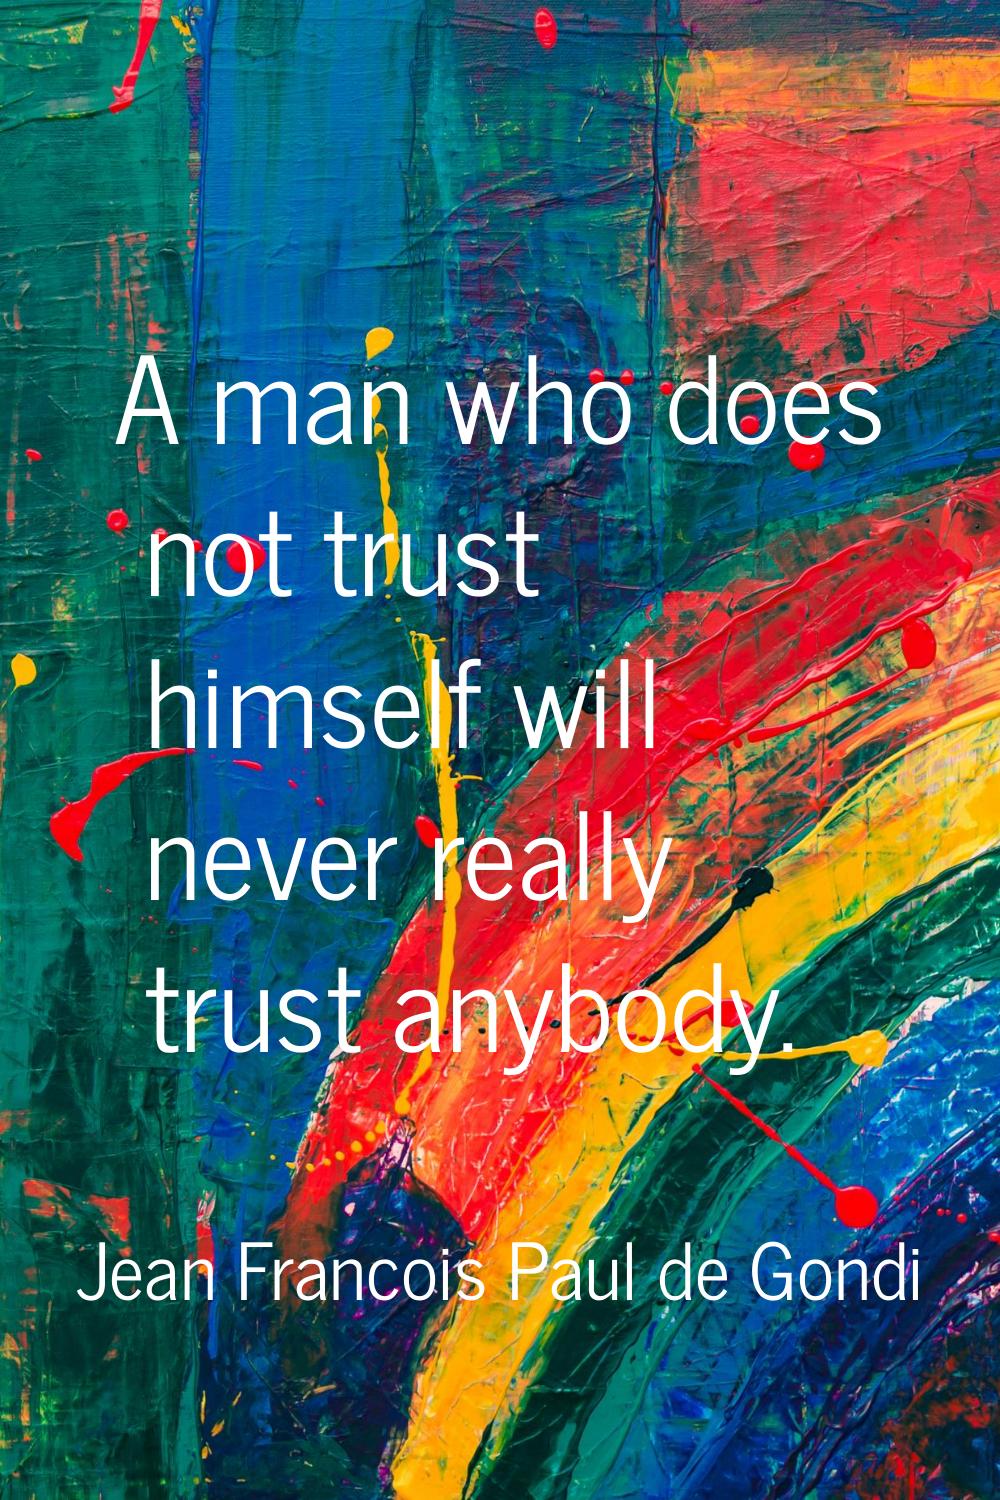 A man who does not trust himself will never really trust anybody.